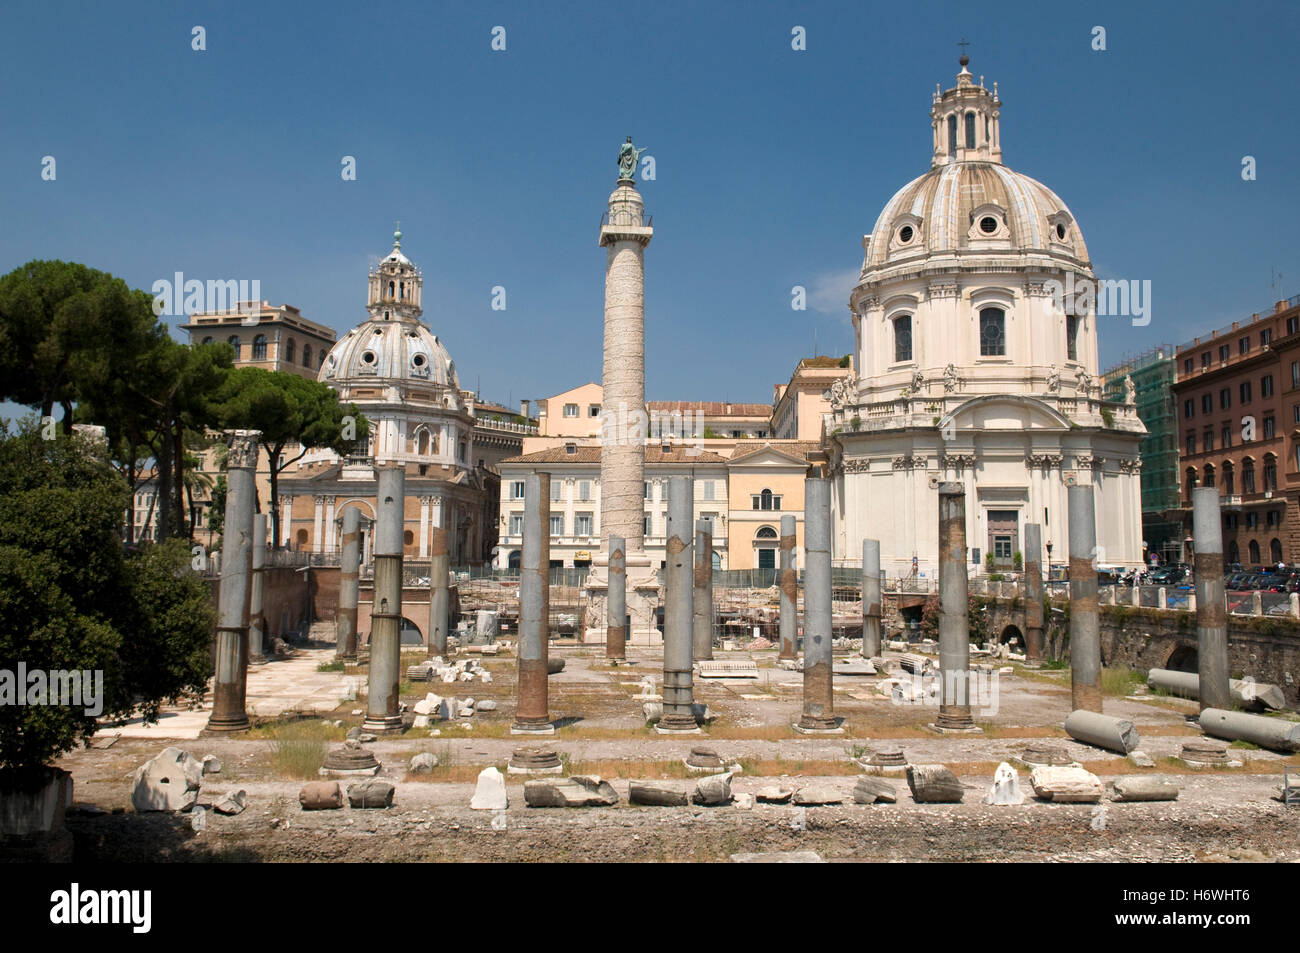 Imperial Fora with the Trajan's Column and the Church Santissimo Nome Di Maria, Church of the Most Holy Name of Mary, Rome Stock Photo